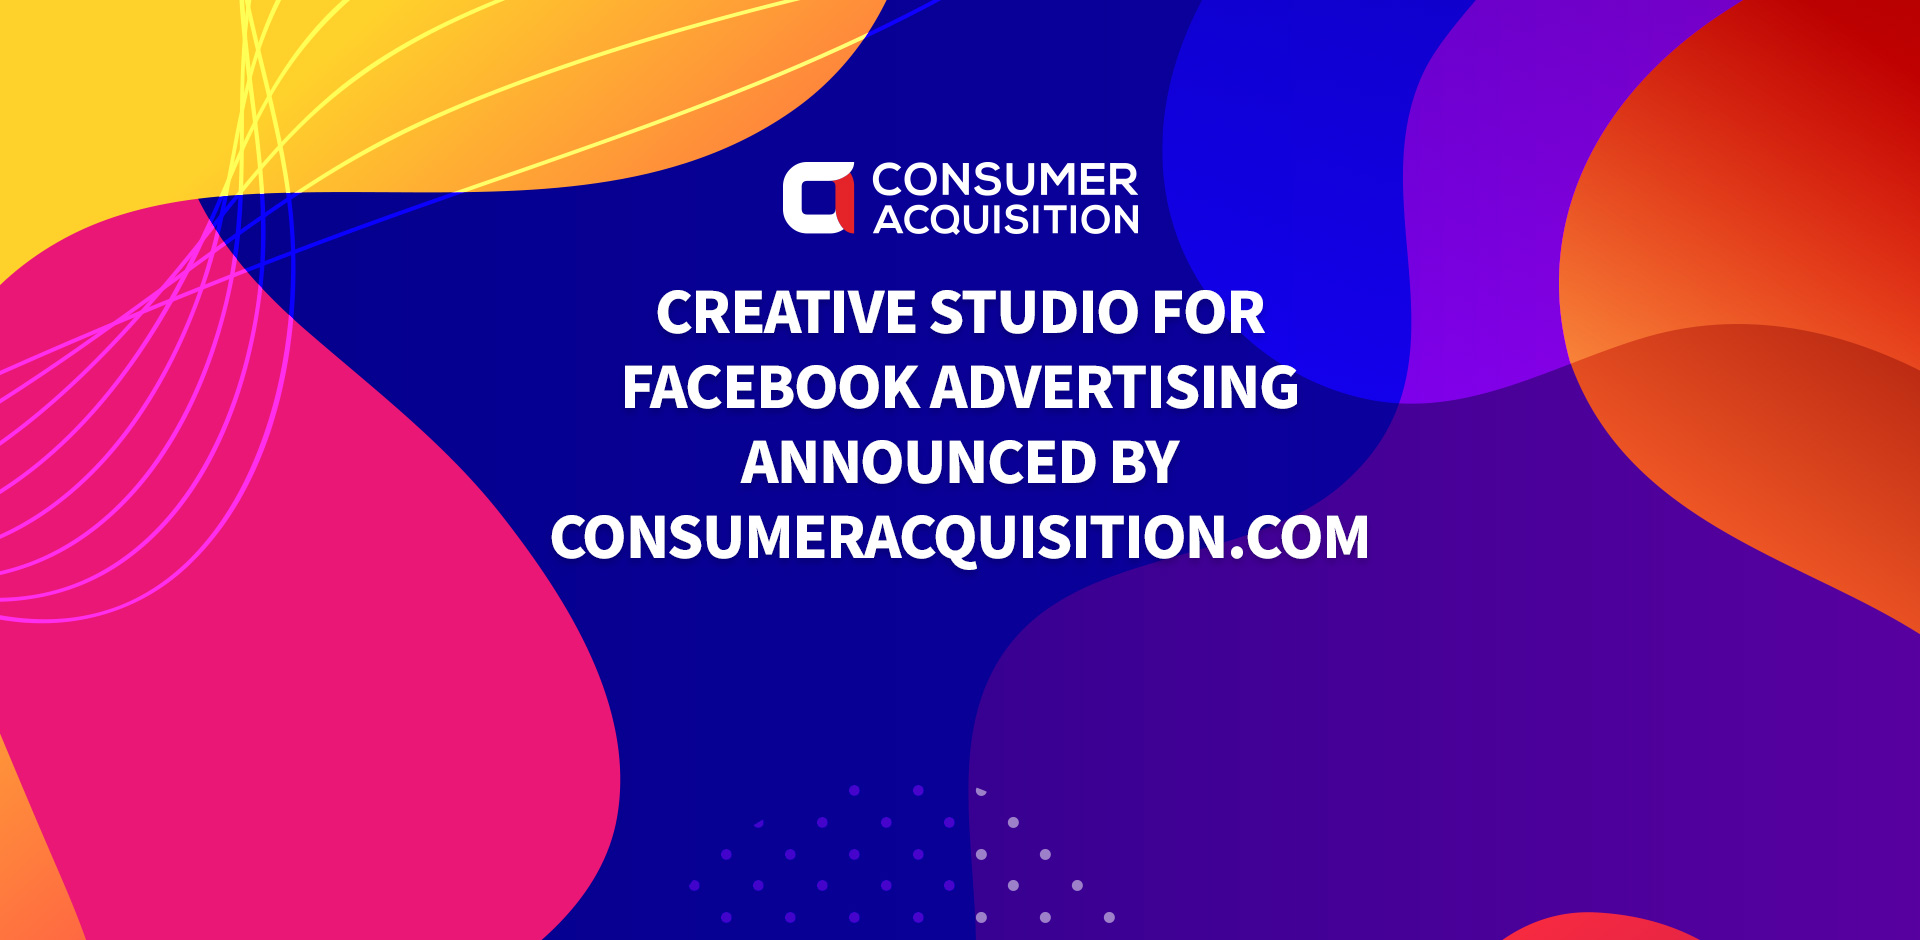 Creative Studio for Facebook Advertising Announced by ConsumerAcquisition.com